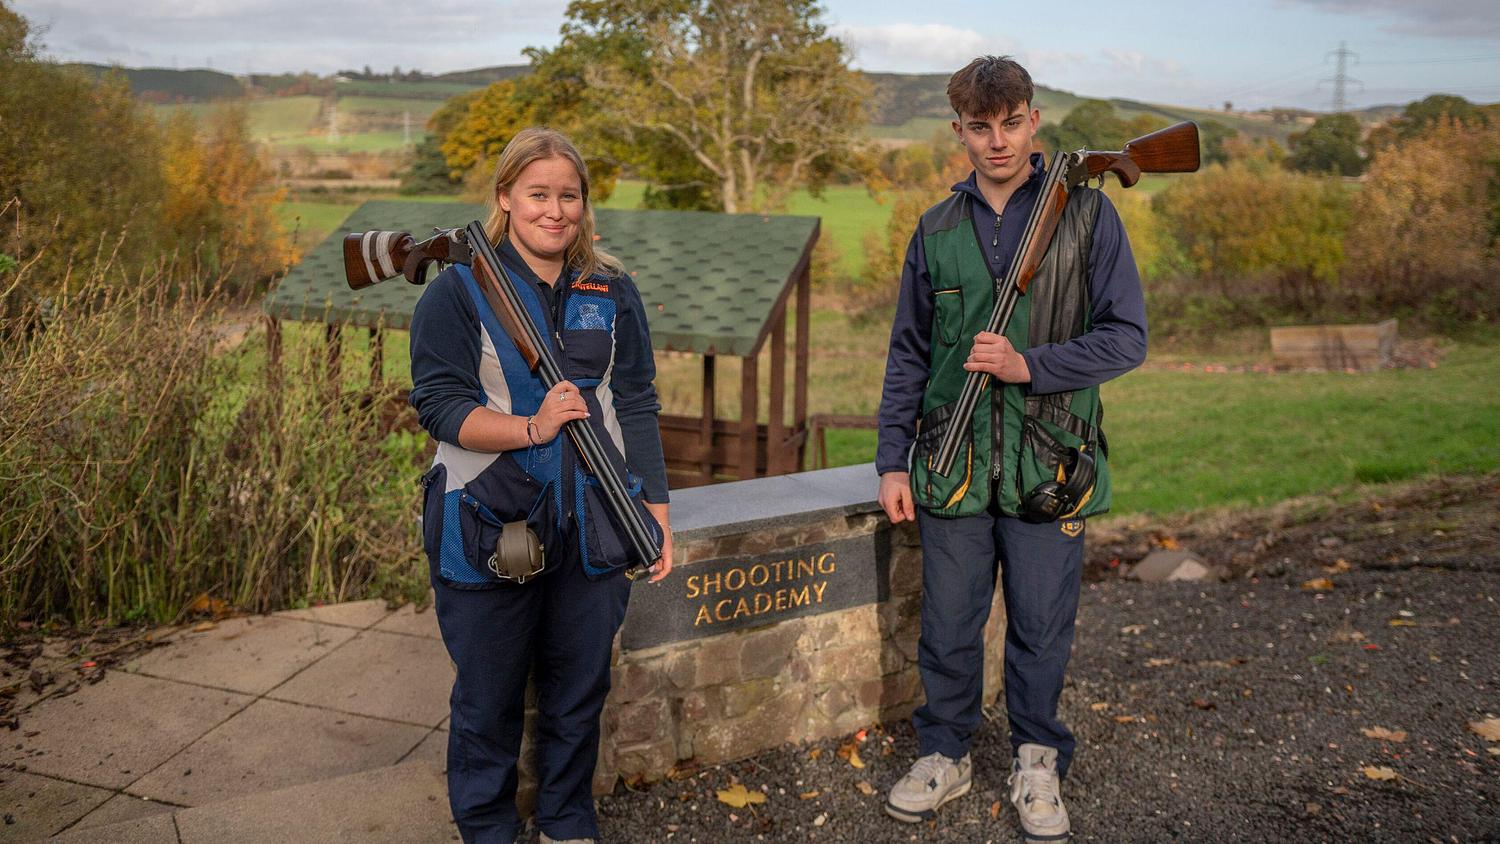 Champion Shooters Alasdair and Molly Secure Spots on Olympic Trap Pathway